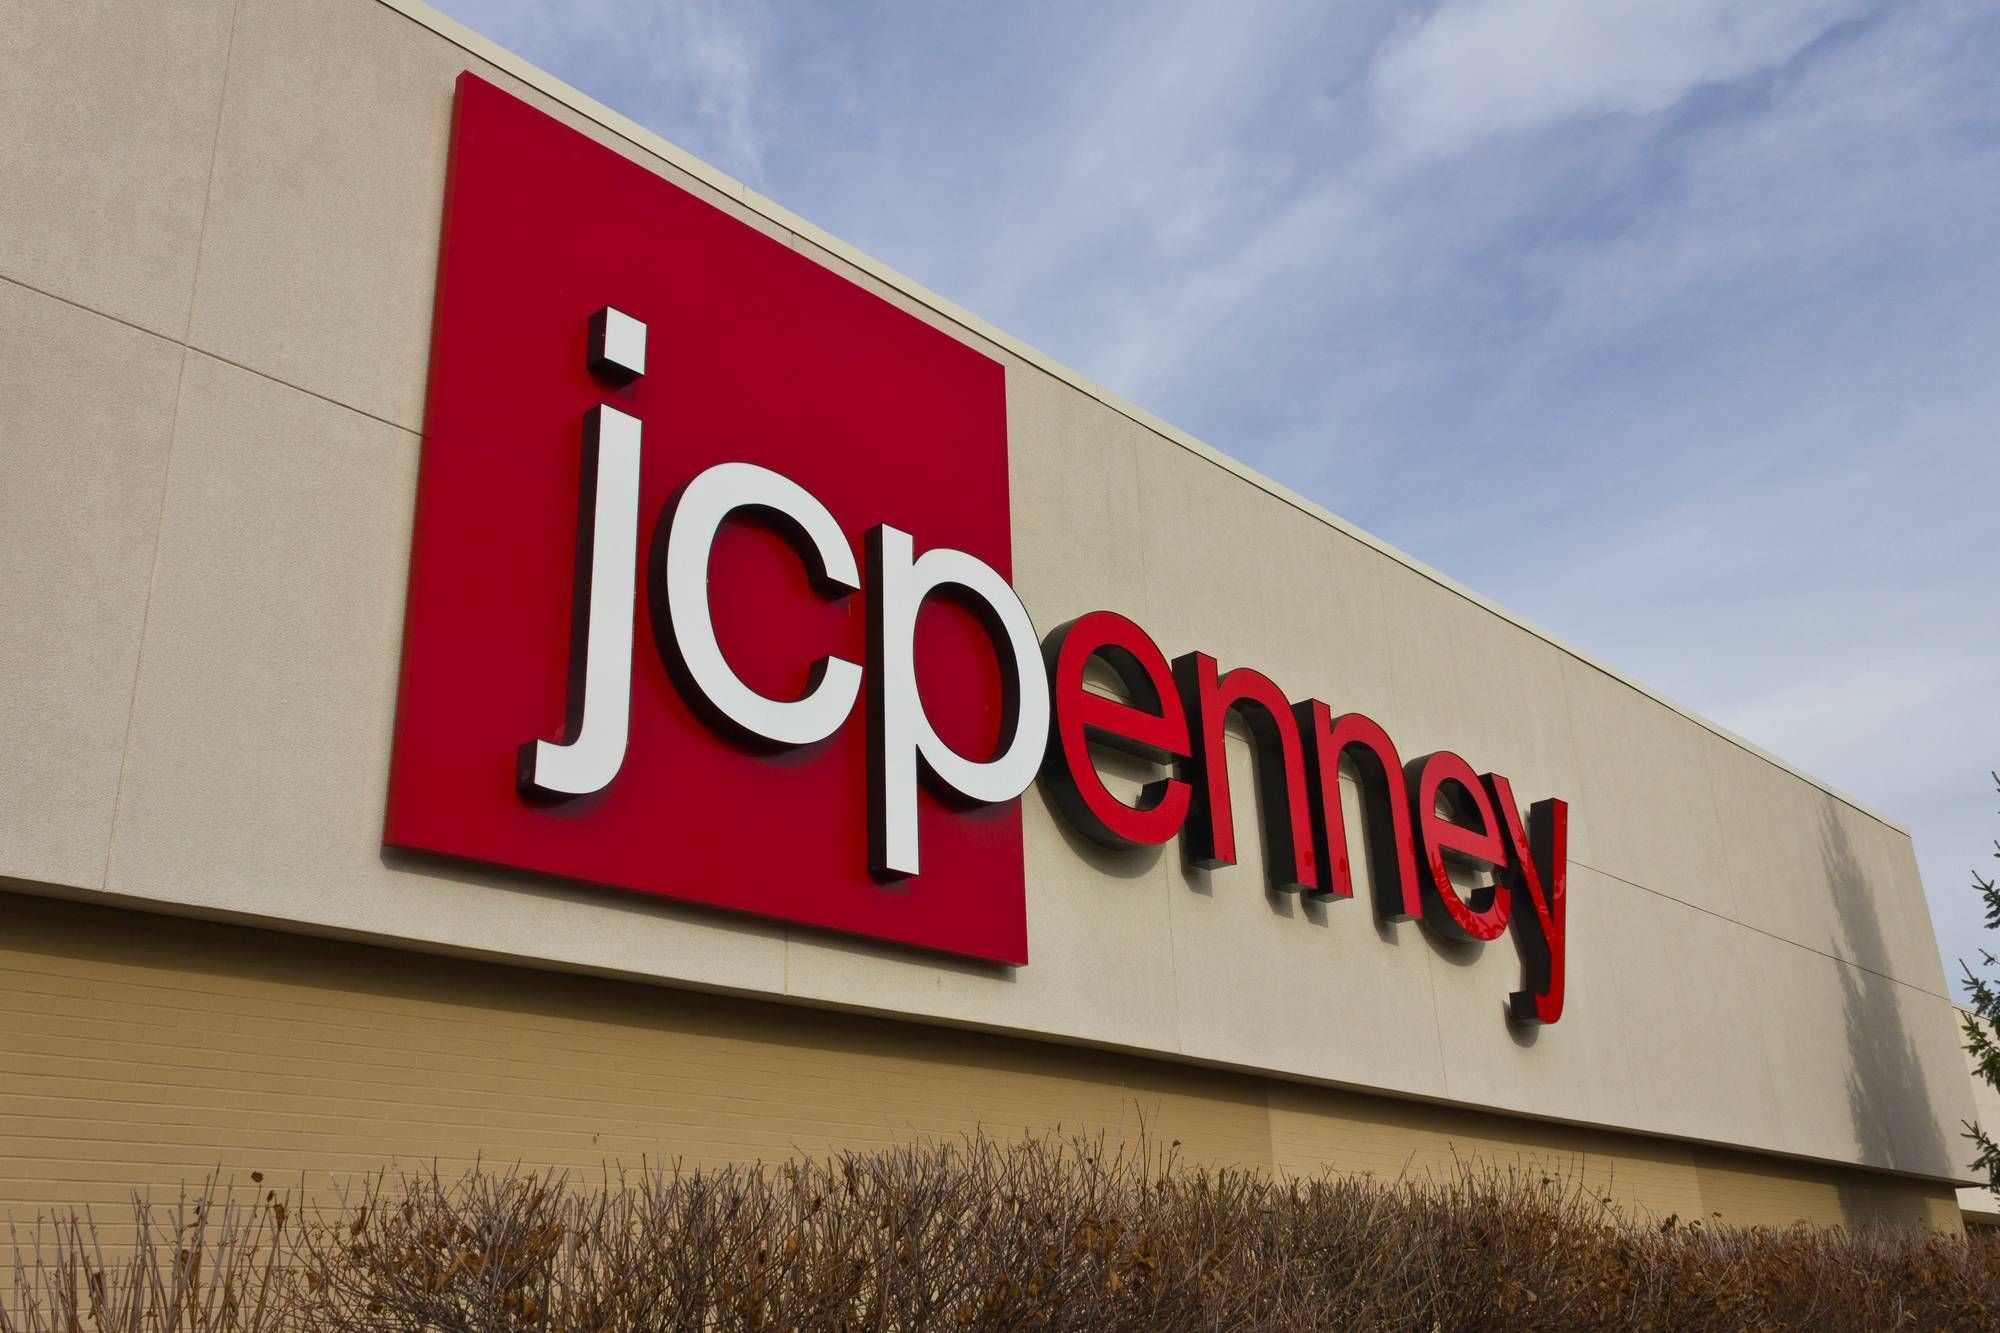 A JCPenny settlement has been reached to resolve claims that the department store sent spam texts.